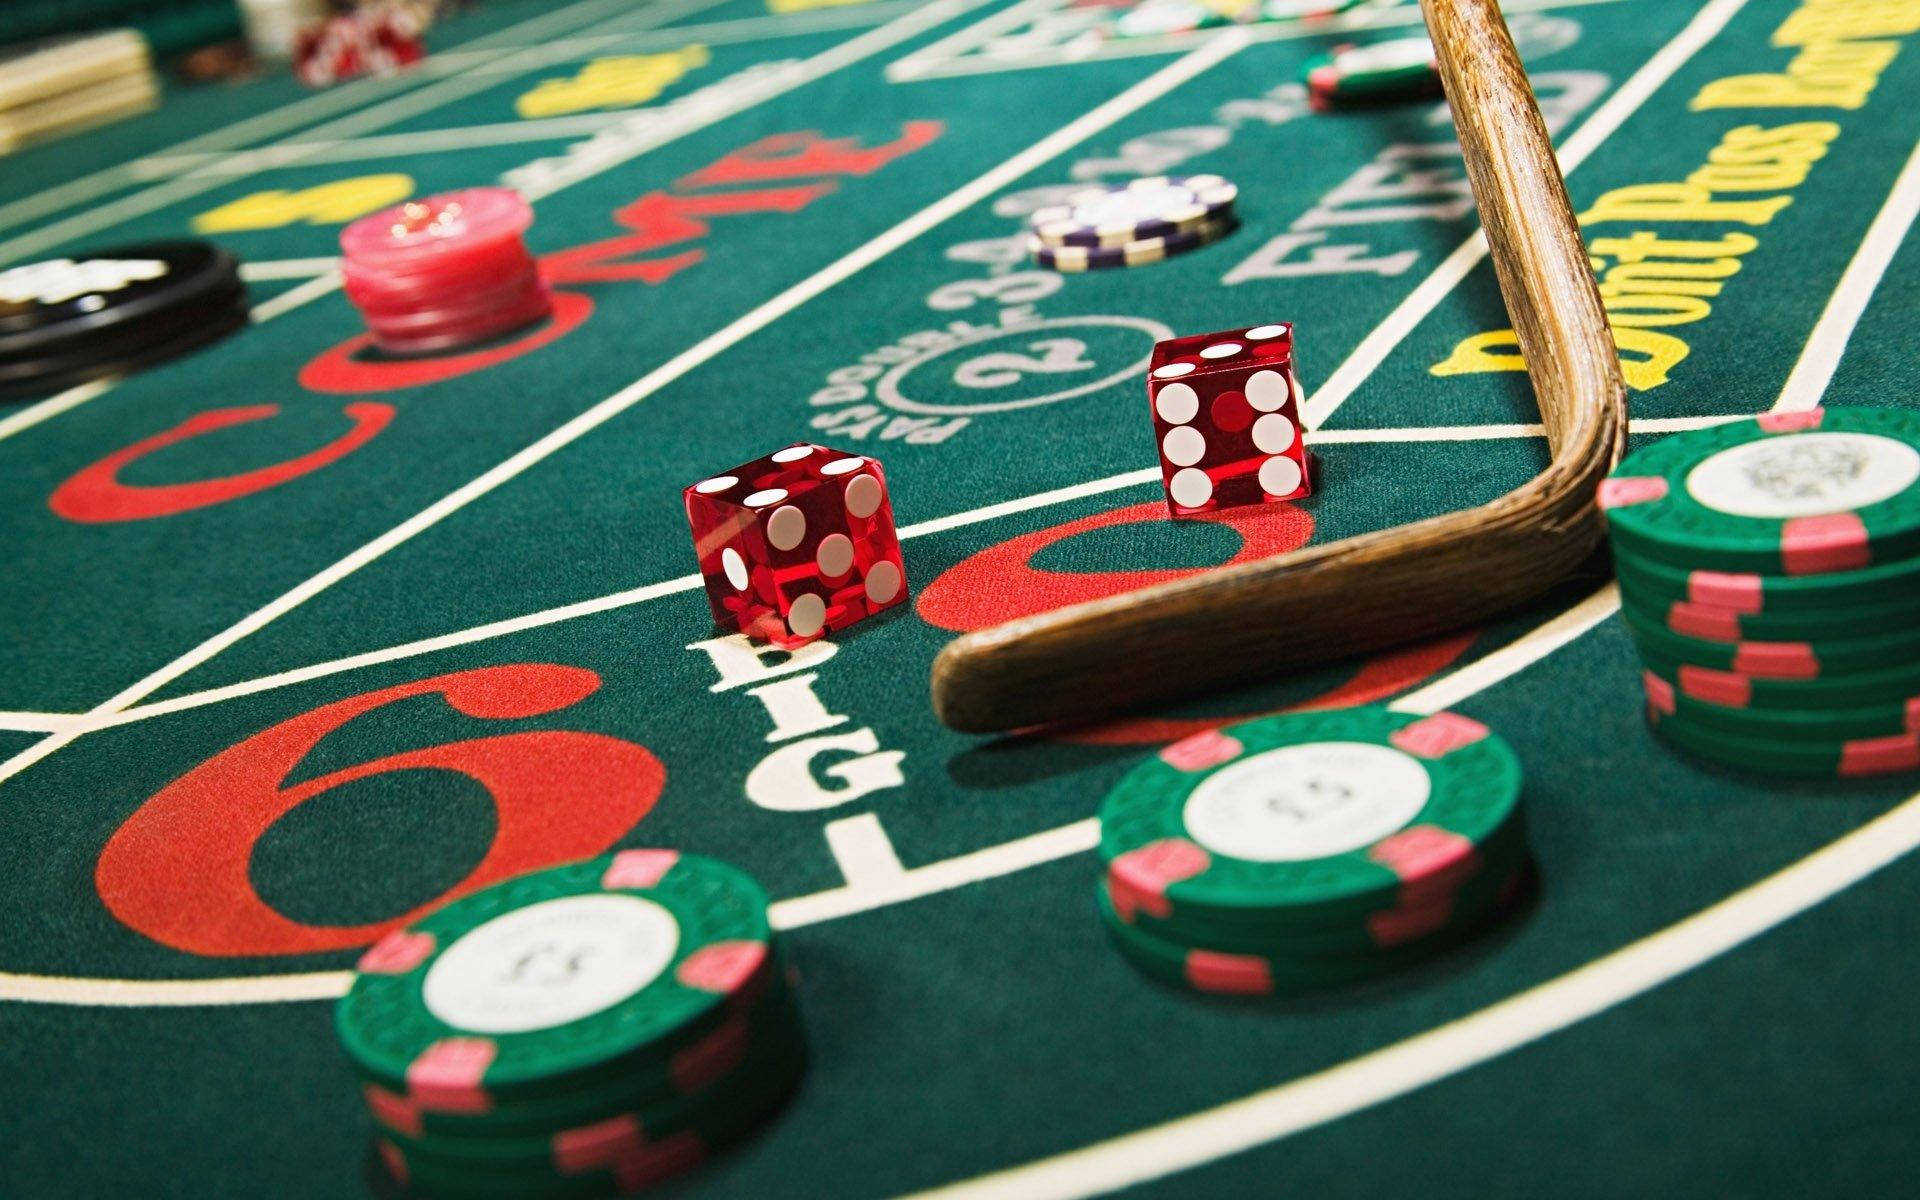 Poker Table With Casino Tokens Wallpaper